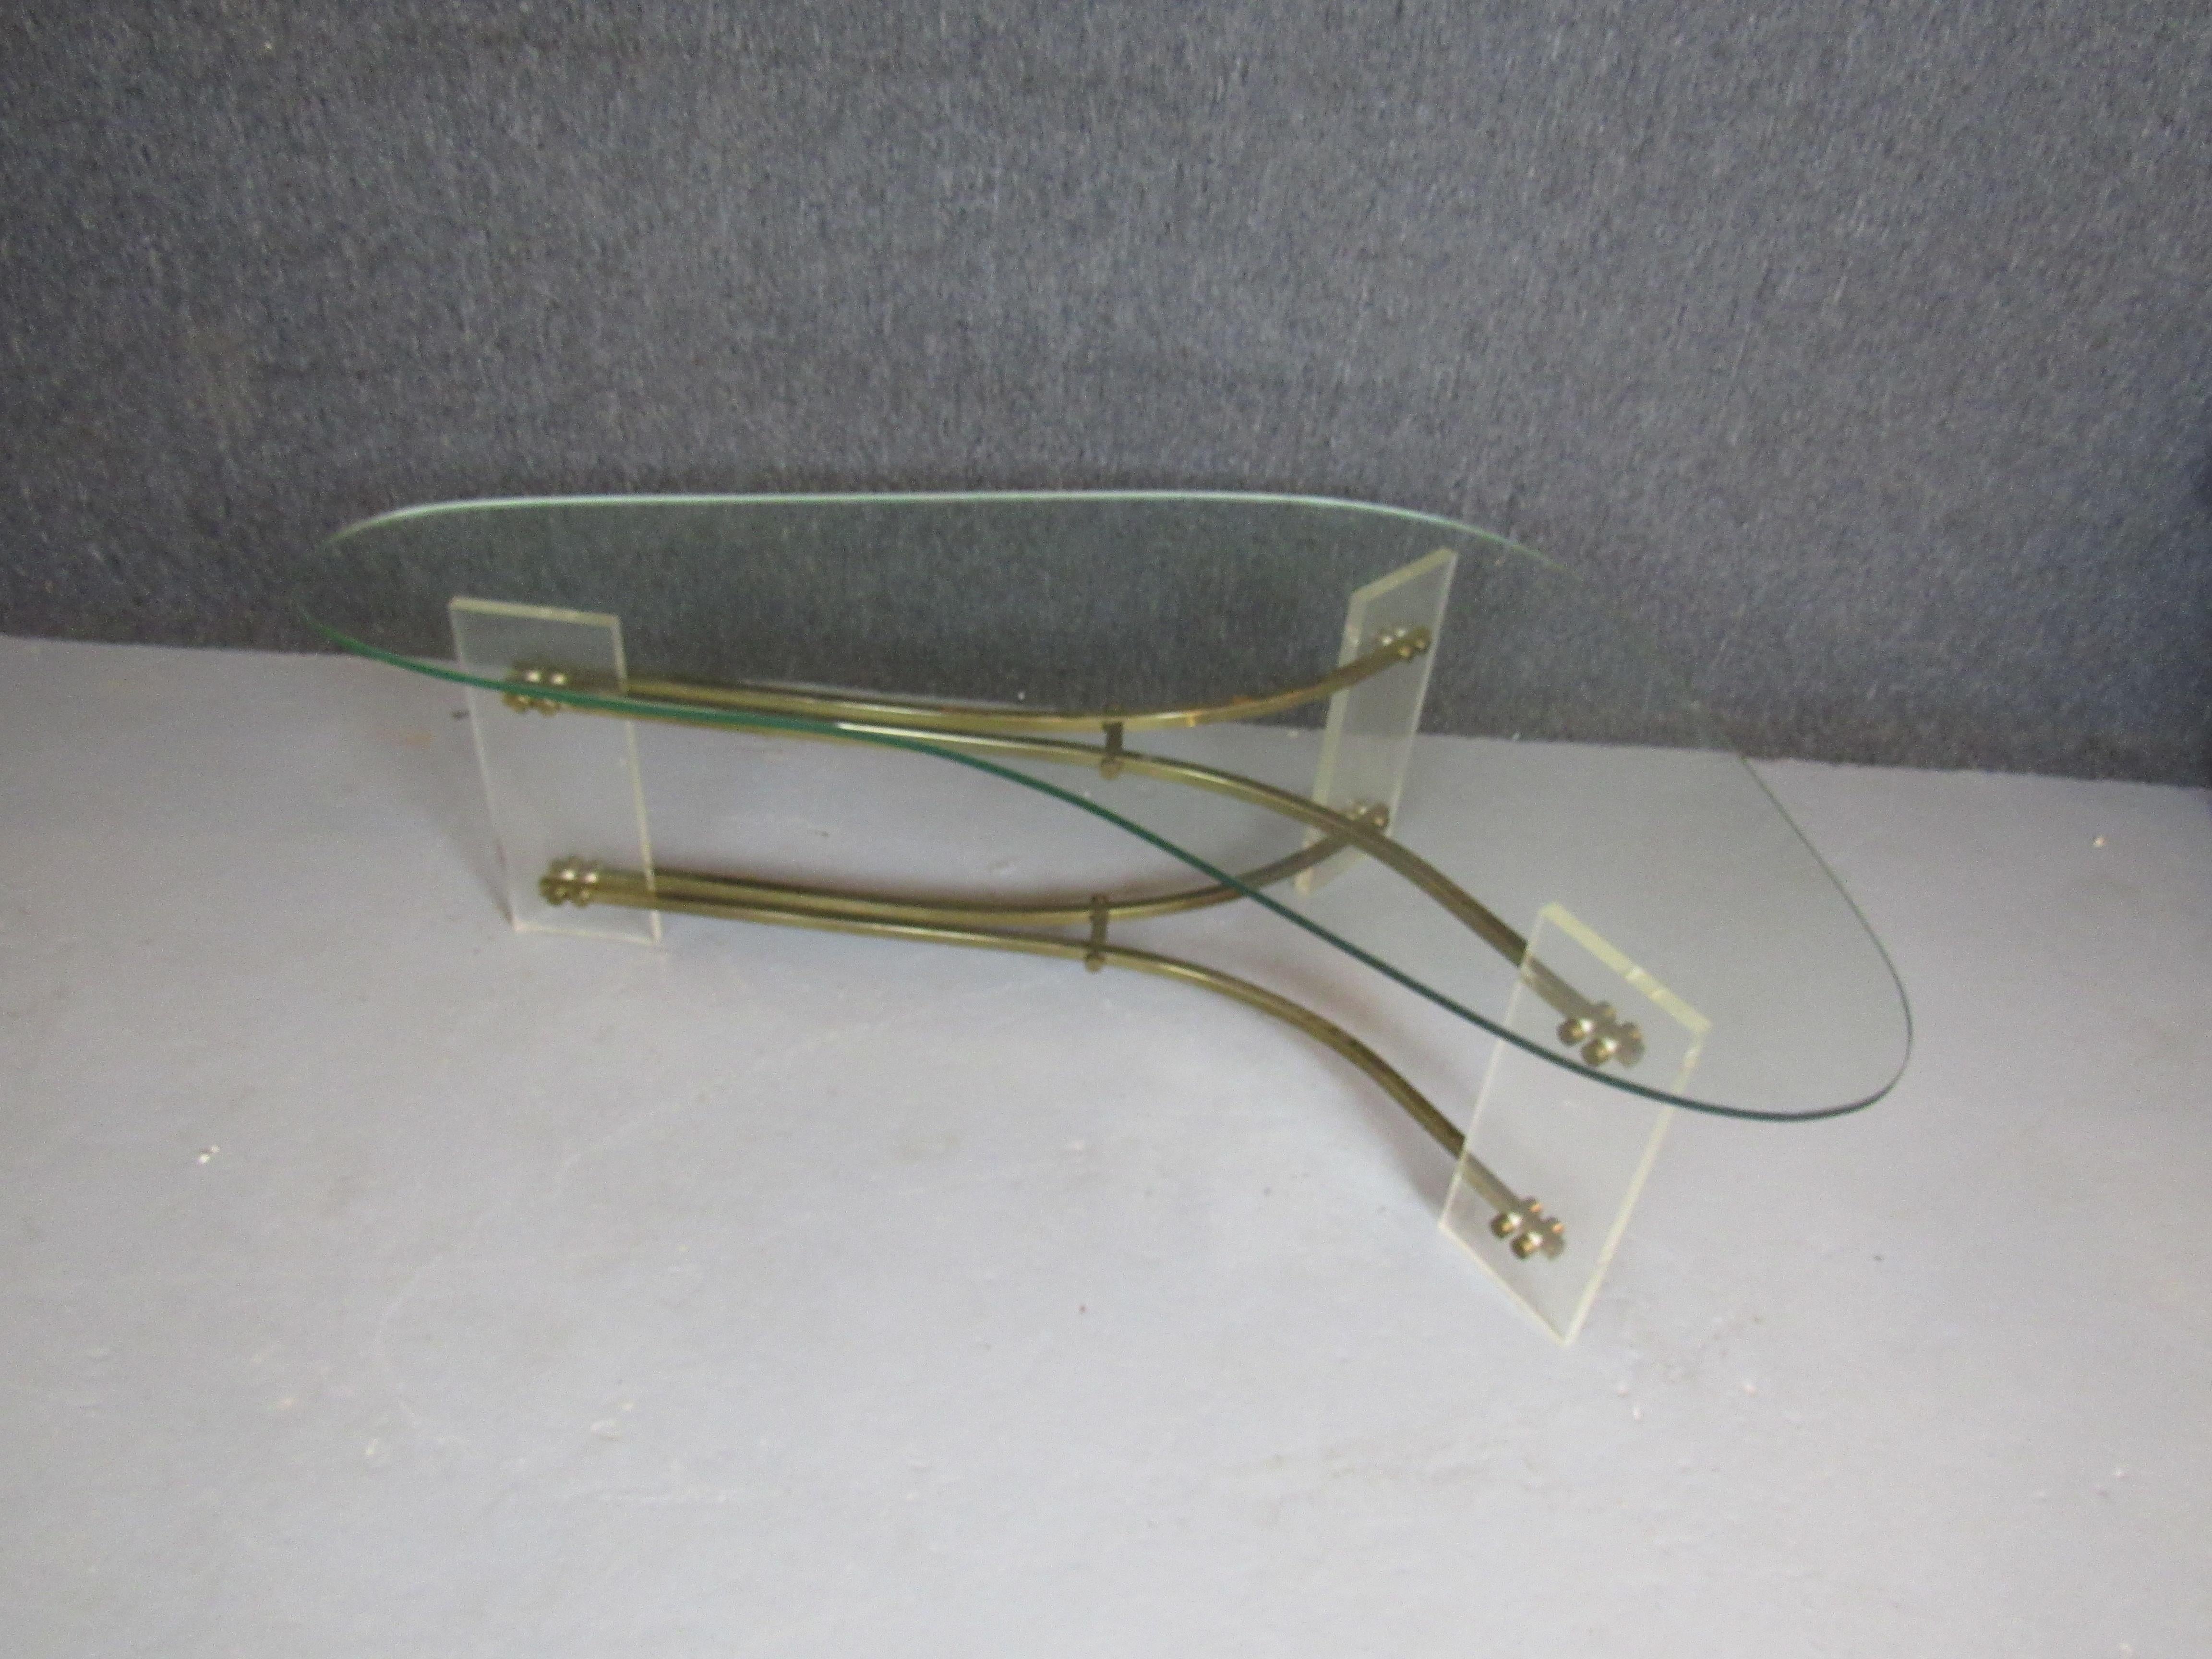 When it comes to vintage lucite furniture nobody did it better than Charles Hollis Jones! Now is your chance to bring home an authentic and unusual piece from the famed designer to the stars. Featuring an asymmetrical lucite and brass base with a